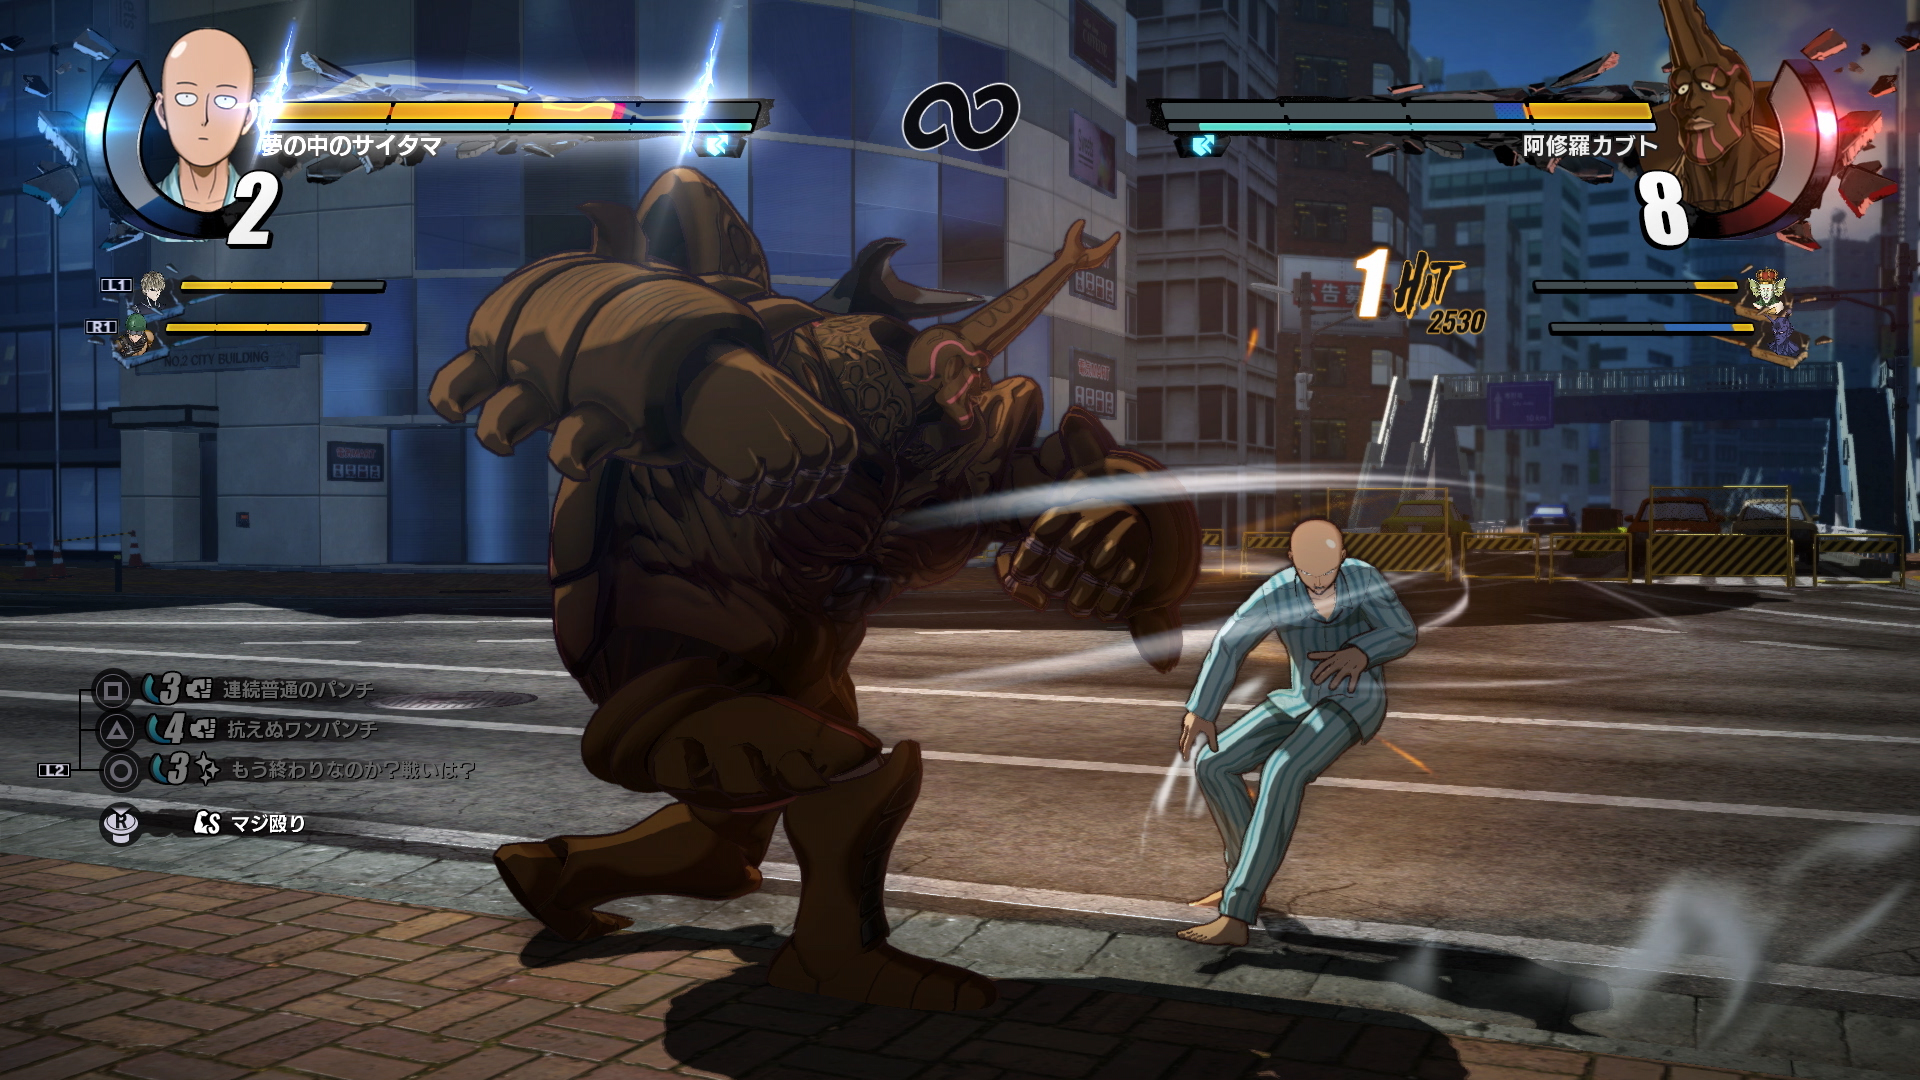 The first man game. One Punch игра. Punch man игра. One-Punch man: a Hero Nobody knows. Punch Hero игра.